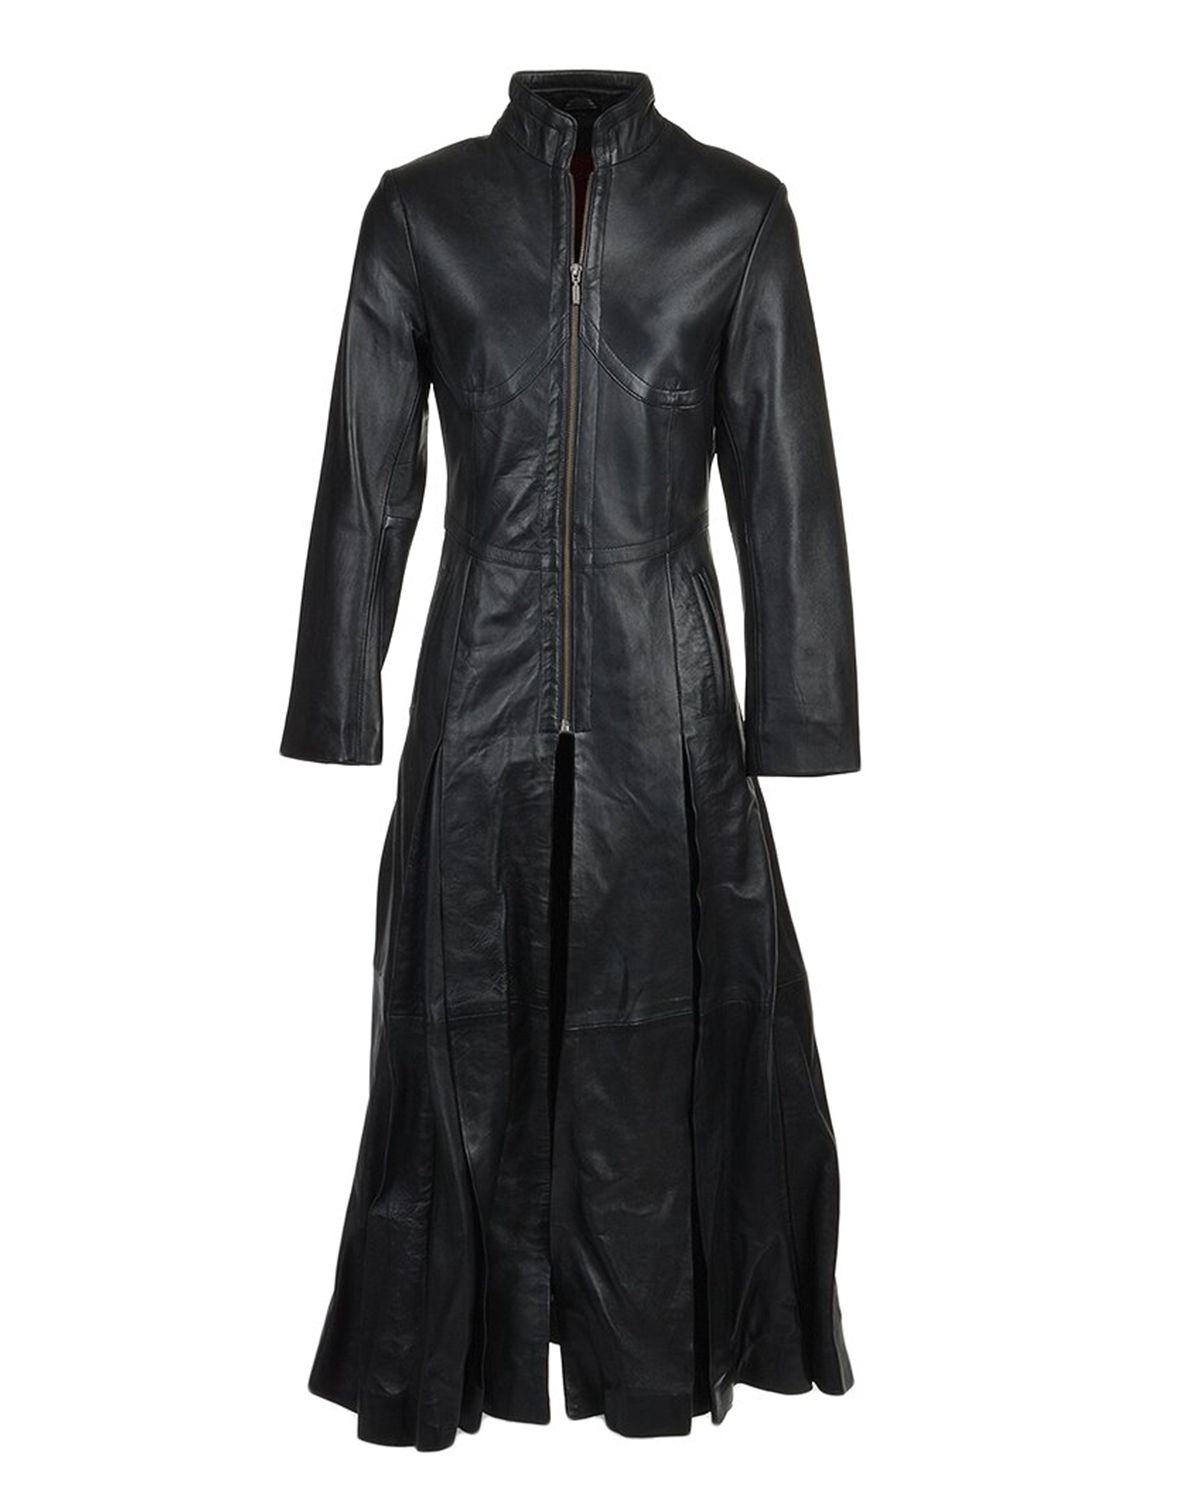 Womens Long Real Leather Gothic Coat - Shop at LeatherScin